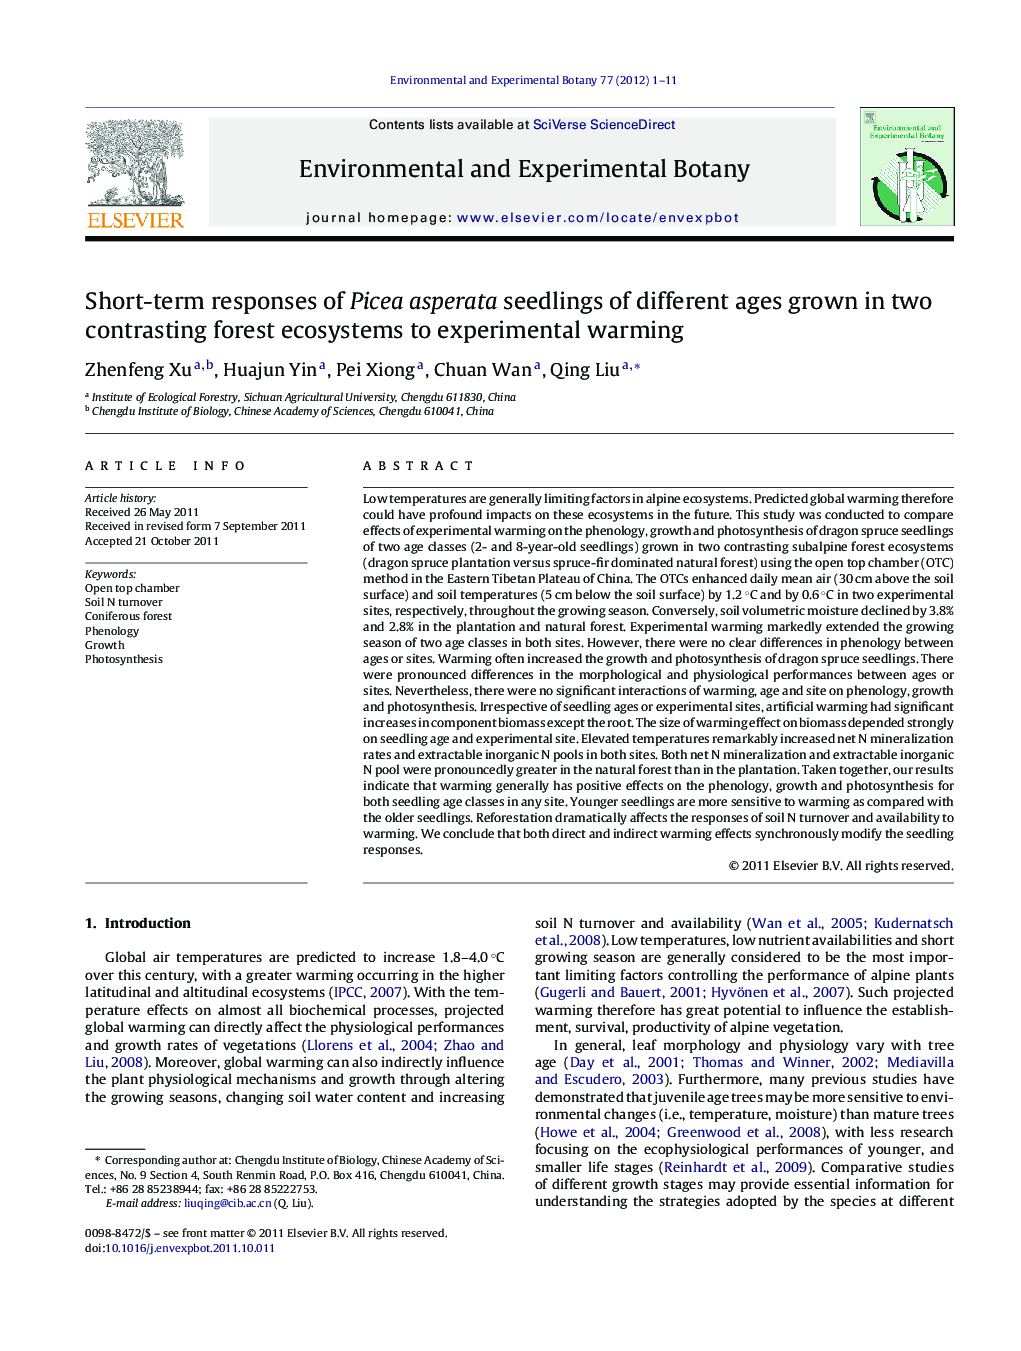 Short-term responses of Picea asperata seedlings of different ages grown in two contrasting forest ecosystems to experimental warming